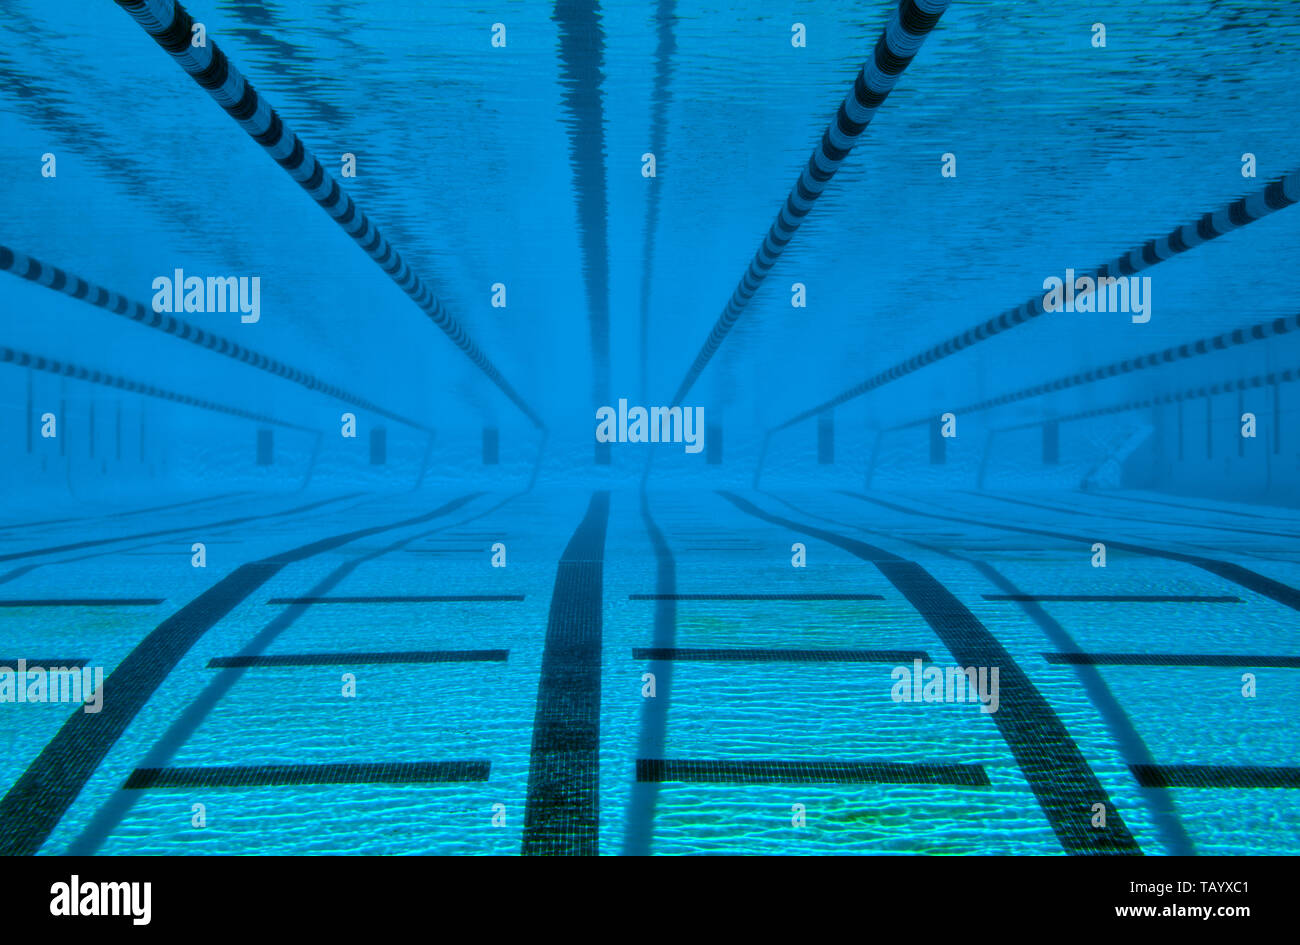 Empty swimming pool with lane markers. Stock Photo